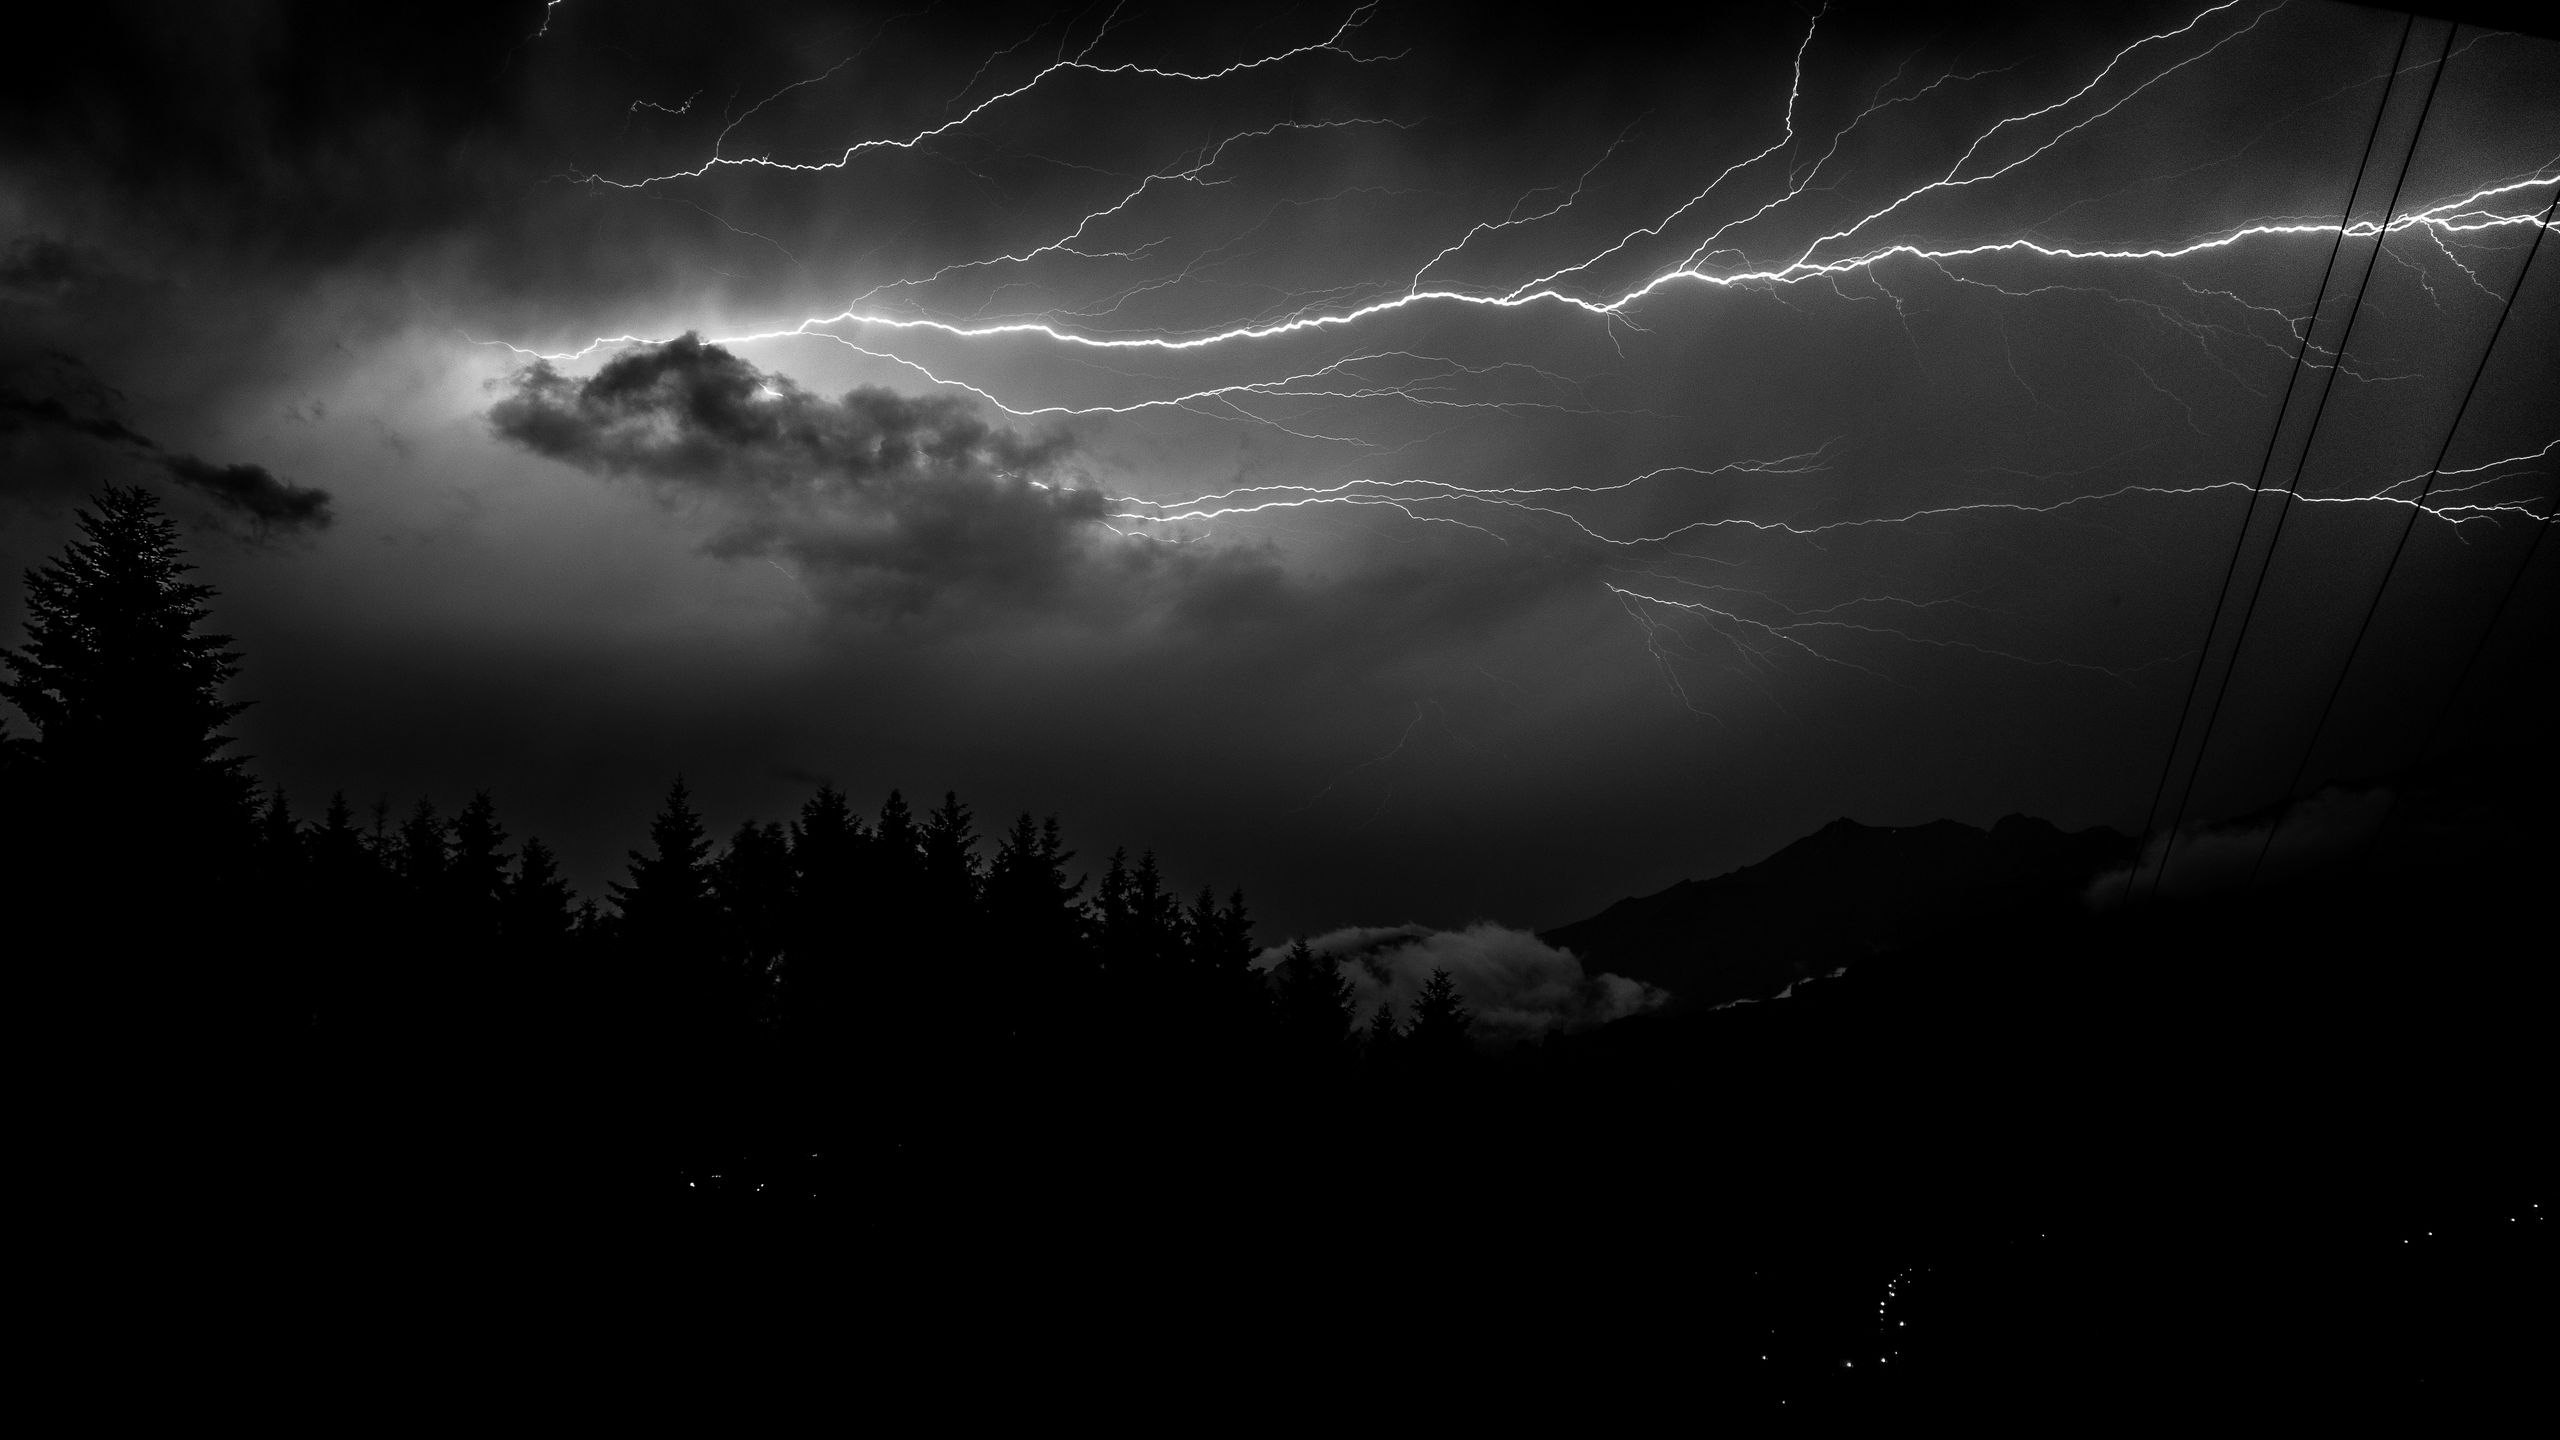 Download wallpaper 2560x1440 lightning, forest, spruce, bw widescreen 16:9 HD background